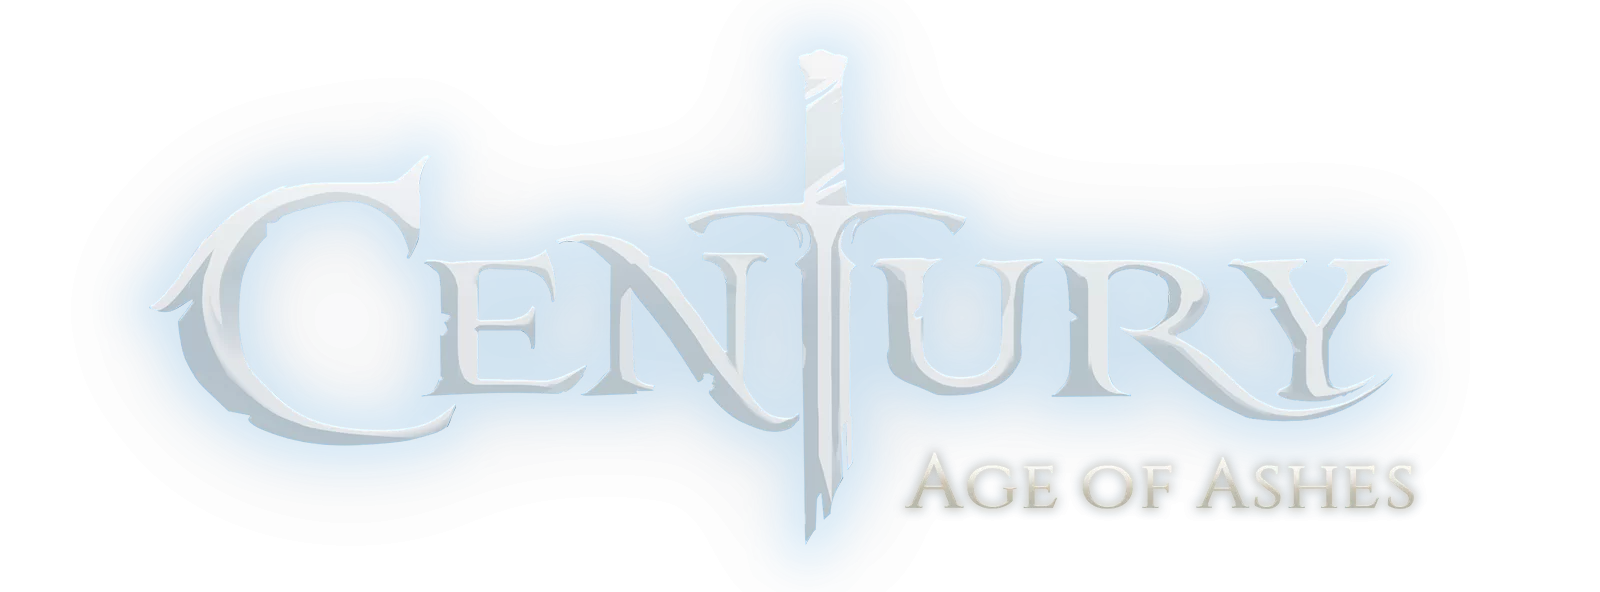 Century:Age of Ashes